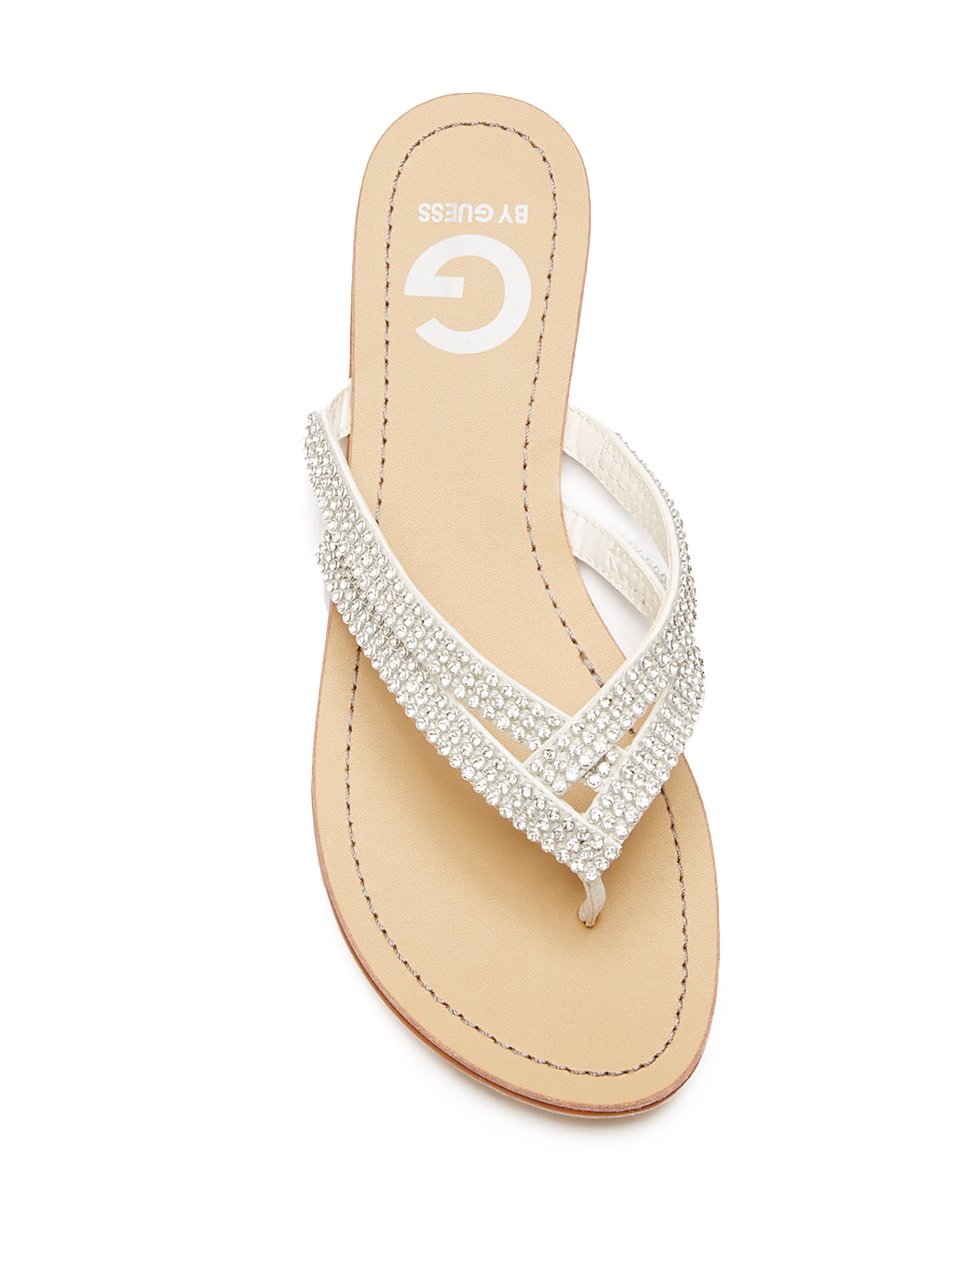 Details about G By Guess Women's Cameron Rhinestone Flip-Flops